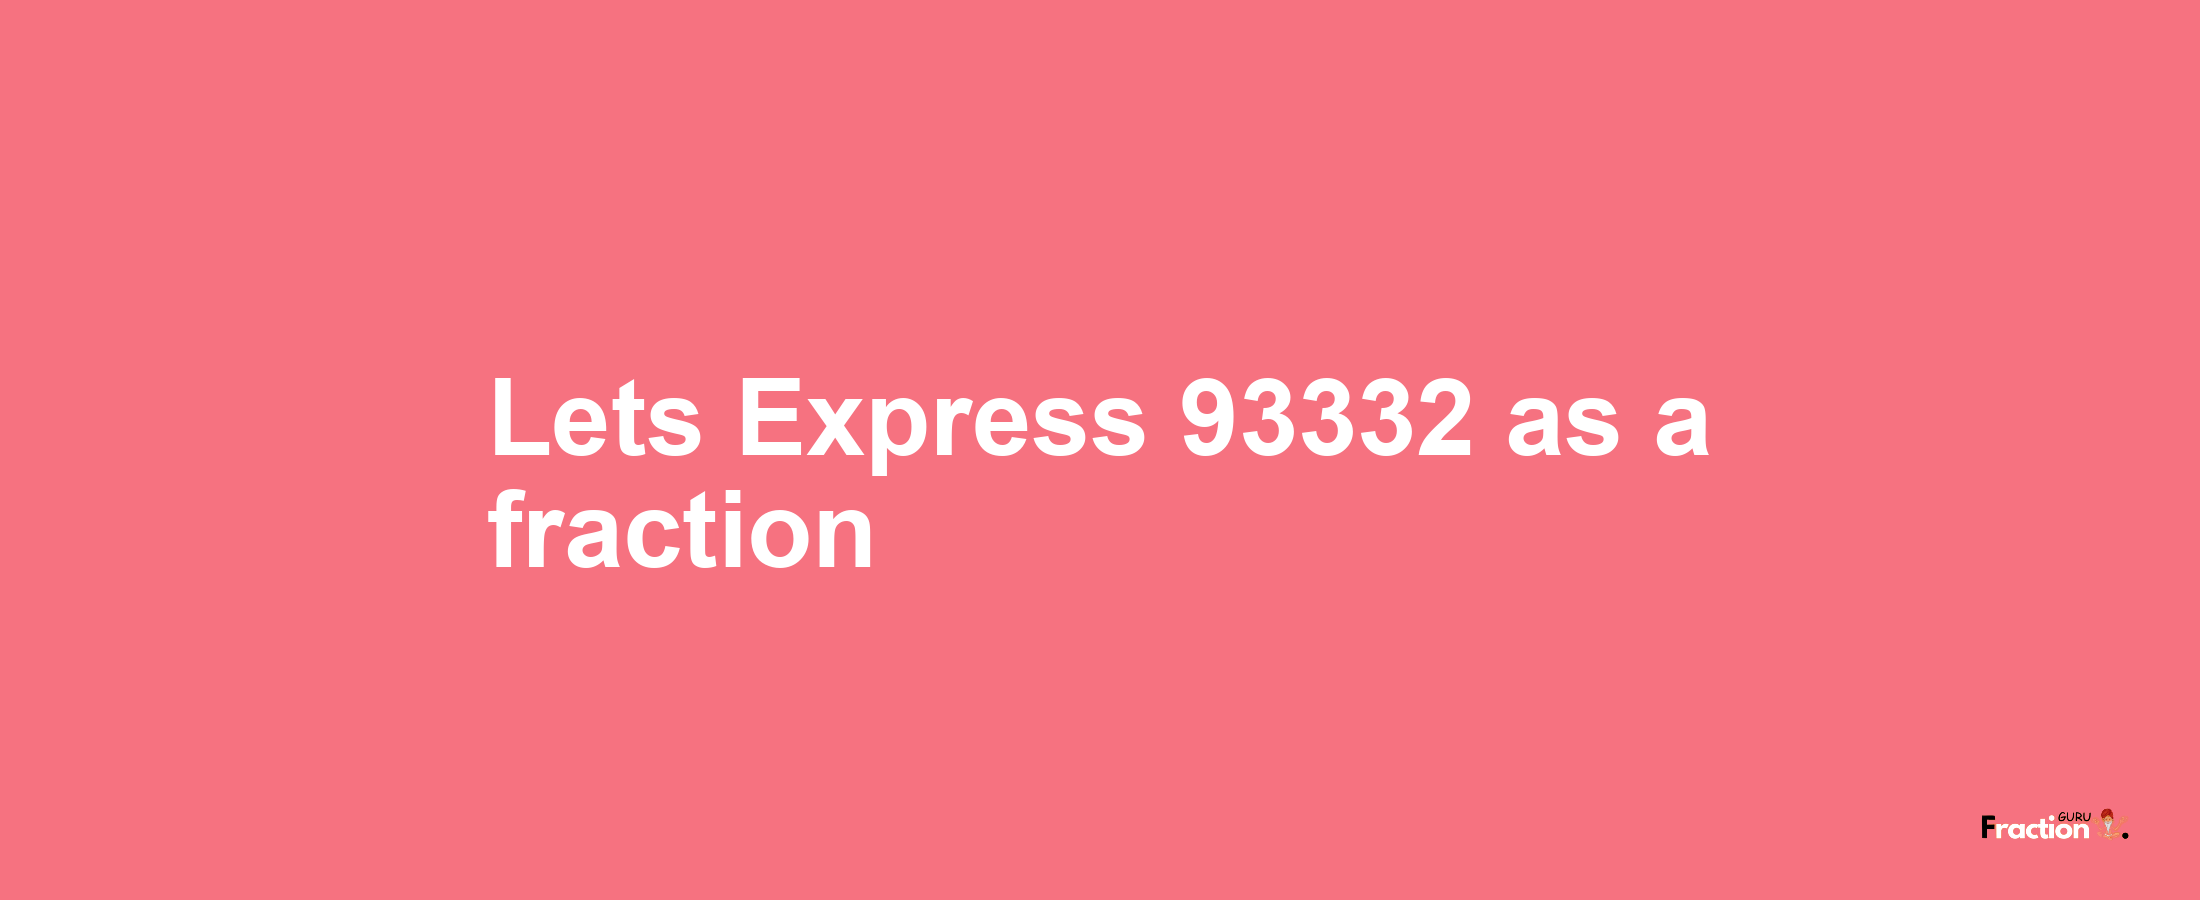 Lets Express 93332 as afraction